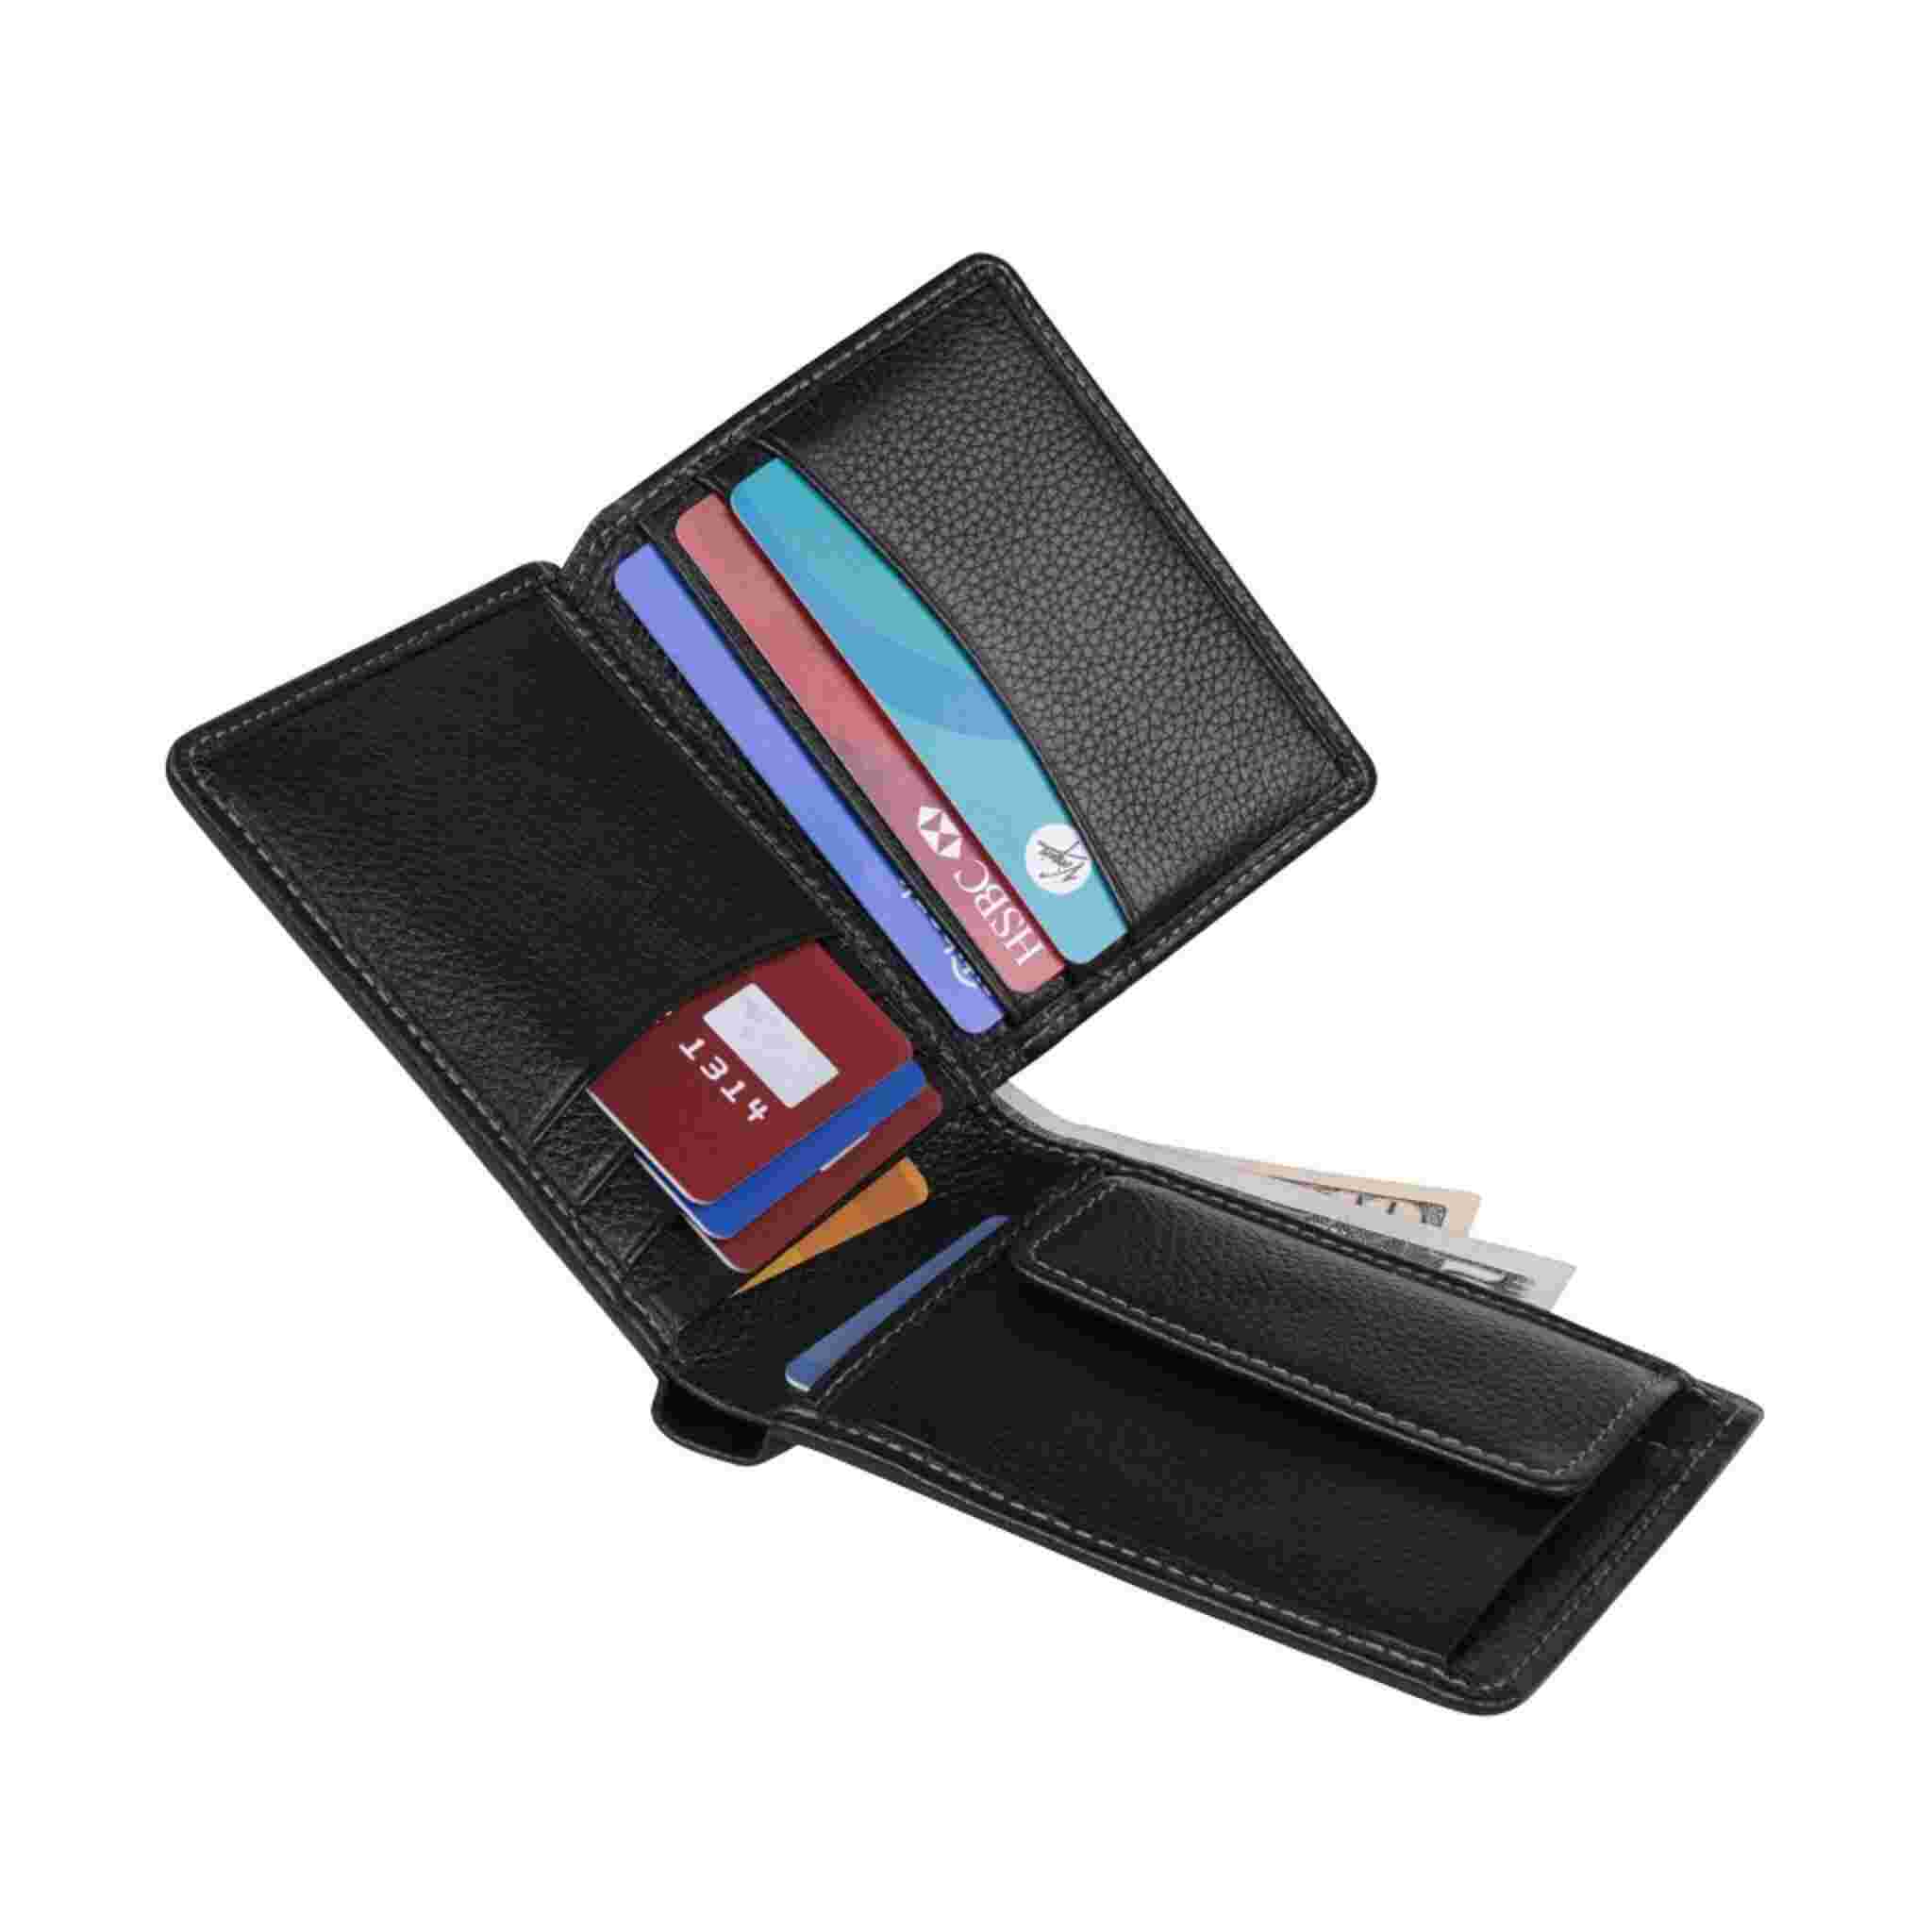 Black open leather wallet with edge stitching